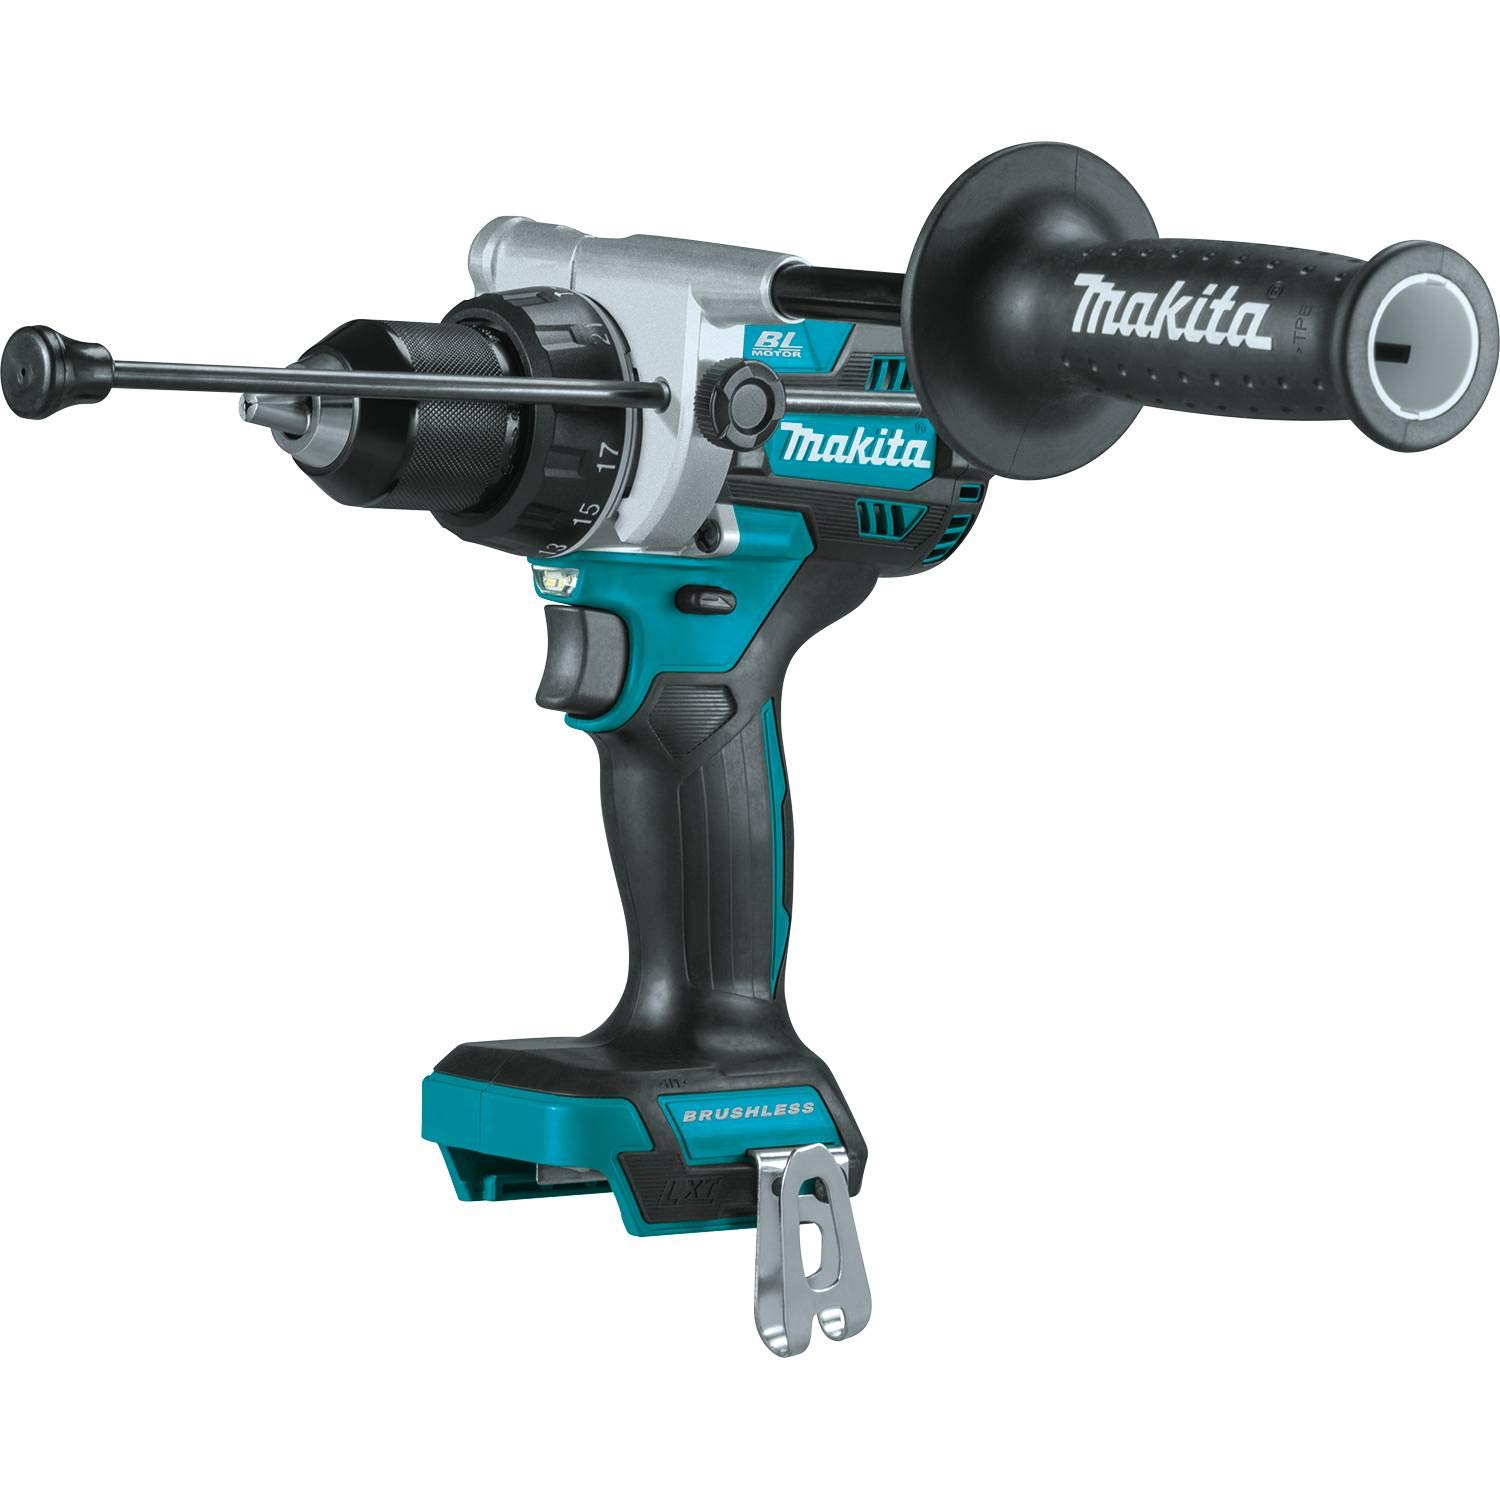 Makita XPH14Z 18V LXT® Lithium-Ion Brushless Cordless 1/2" Hammer Driver-Drill, Tool Only - FS w/Prime - $94.95